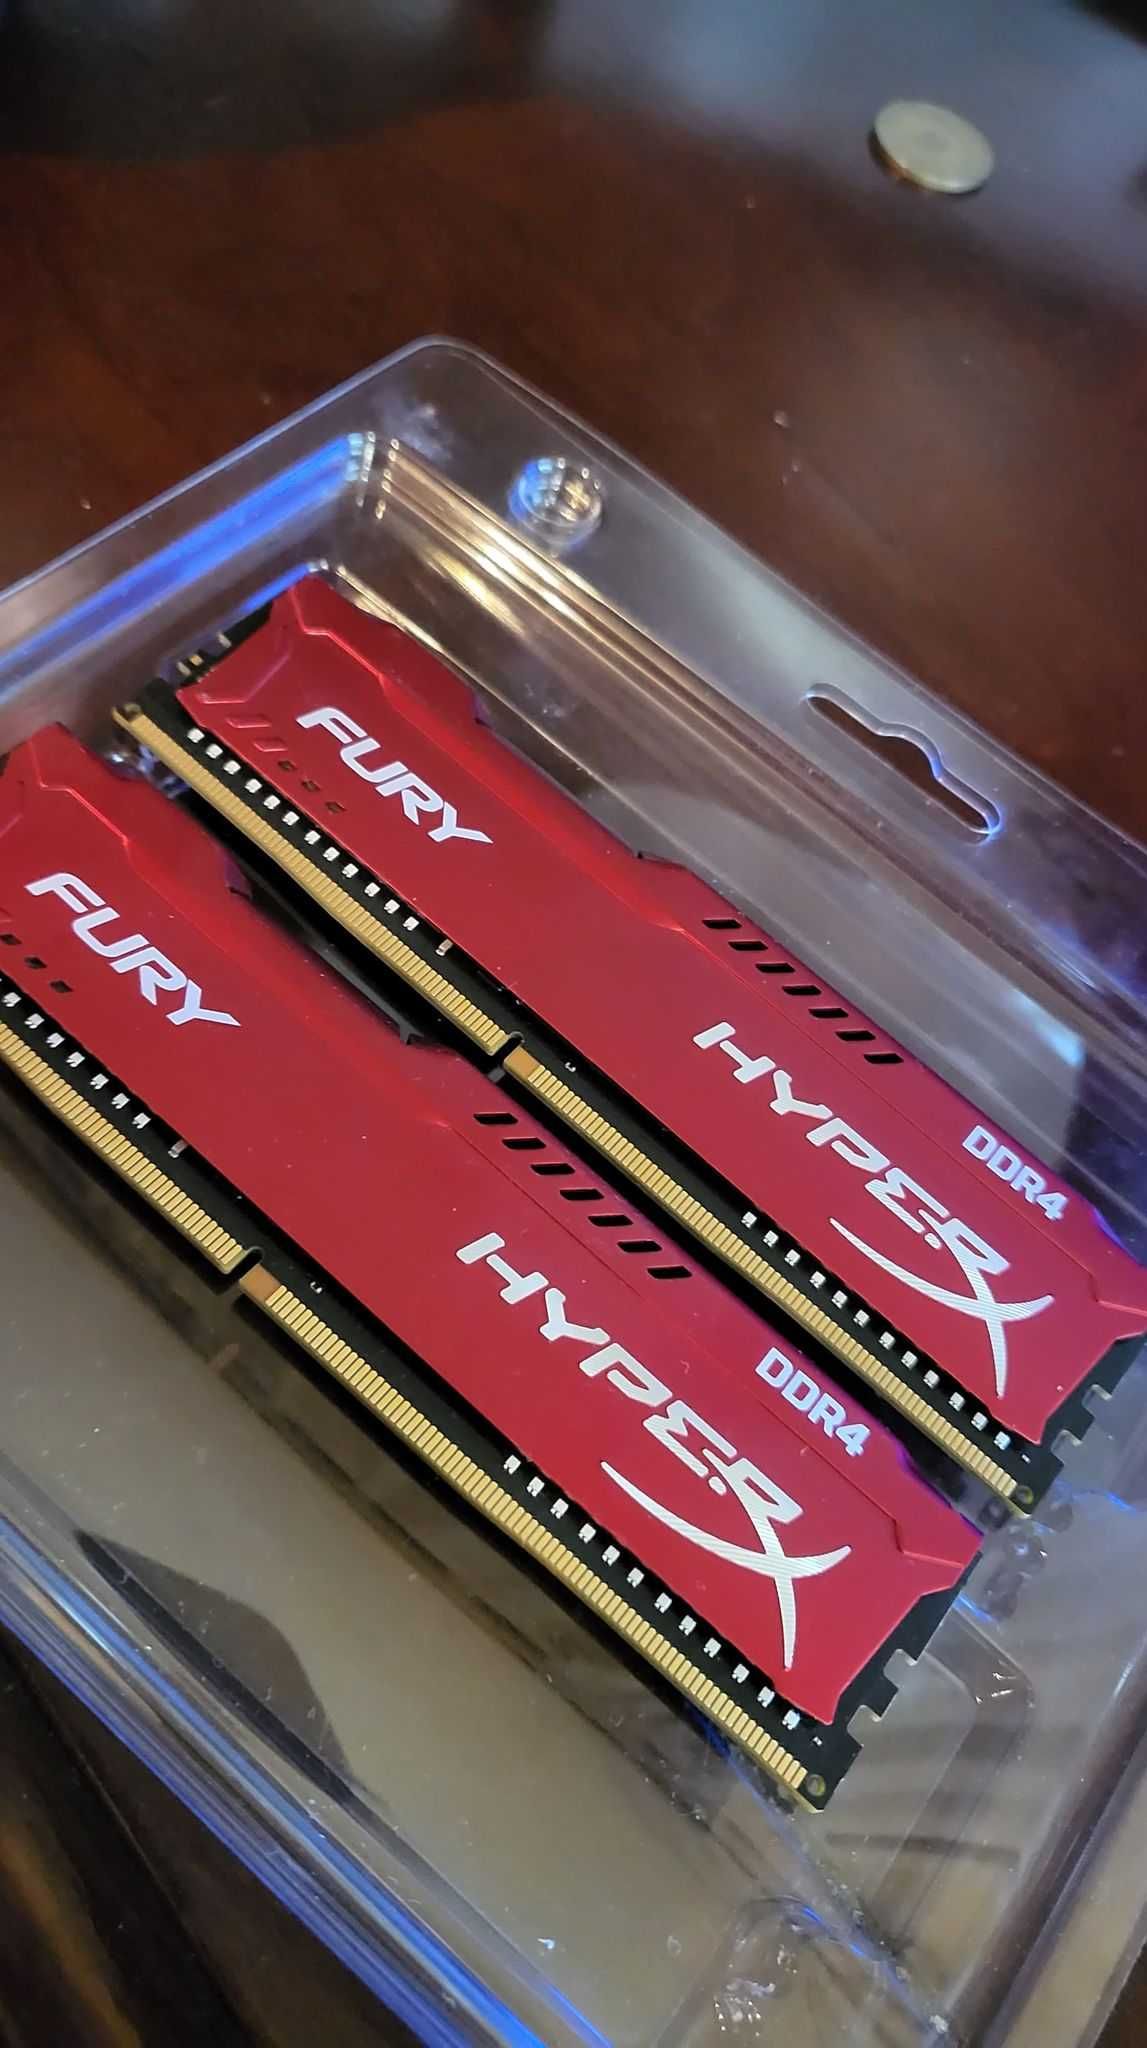 Memorie HyperX Fury Red 8GB DDR4 2400MHz CL15 (Doua bucatii)